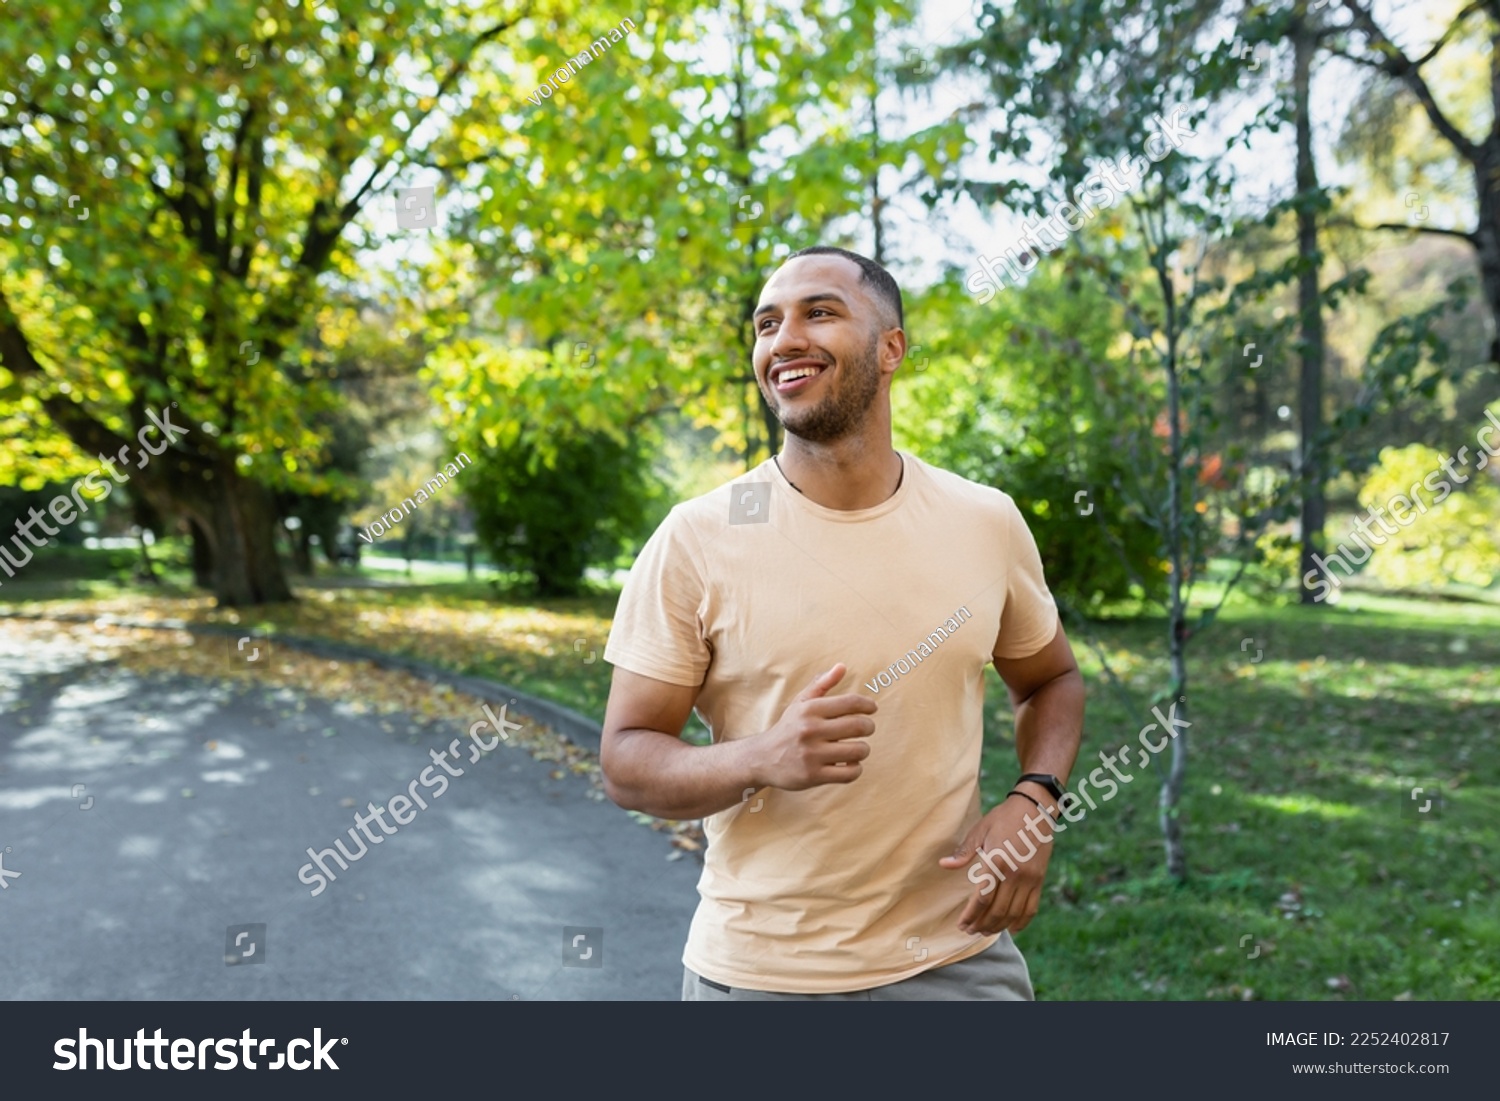 Cheerful and successful hispanic man jogging in the park, man running on a sunny day, smiling and happy having an outdoor activity. #2252402817